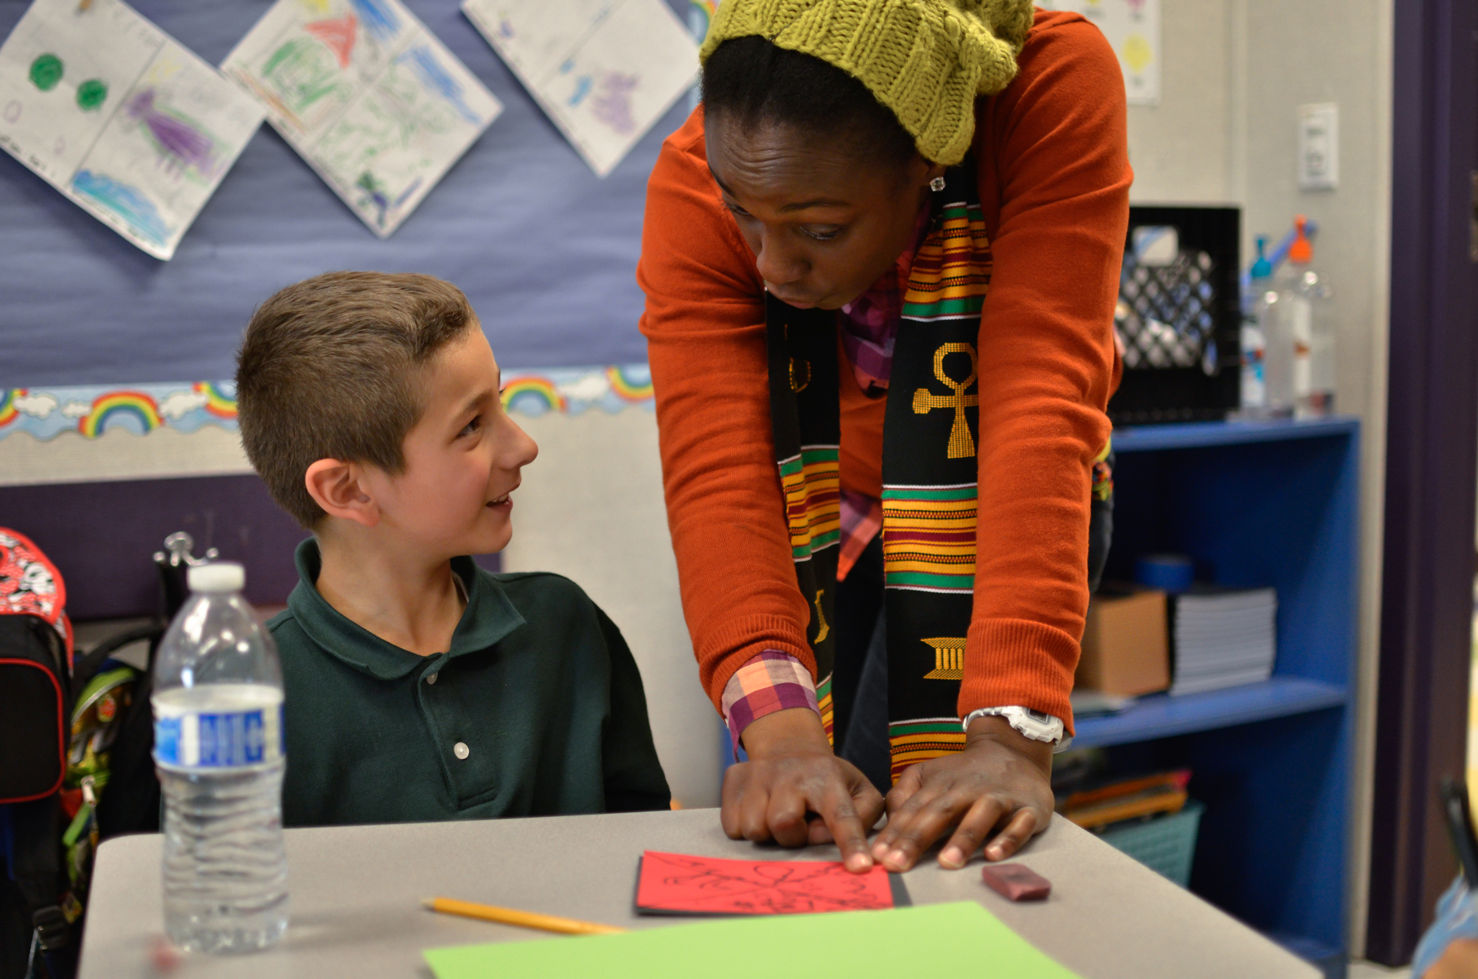 Ms. Solomon points out an interesting pattern on a student's kente square.